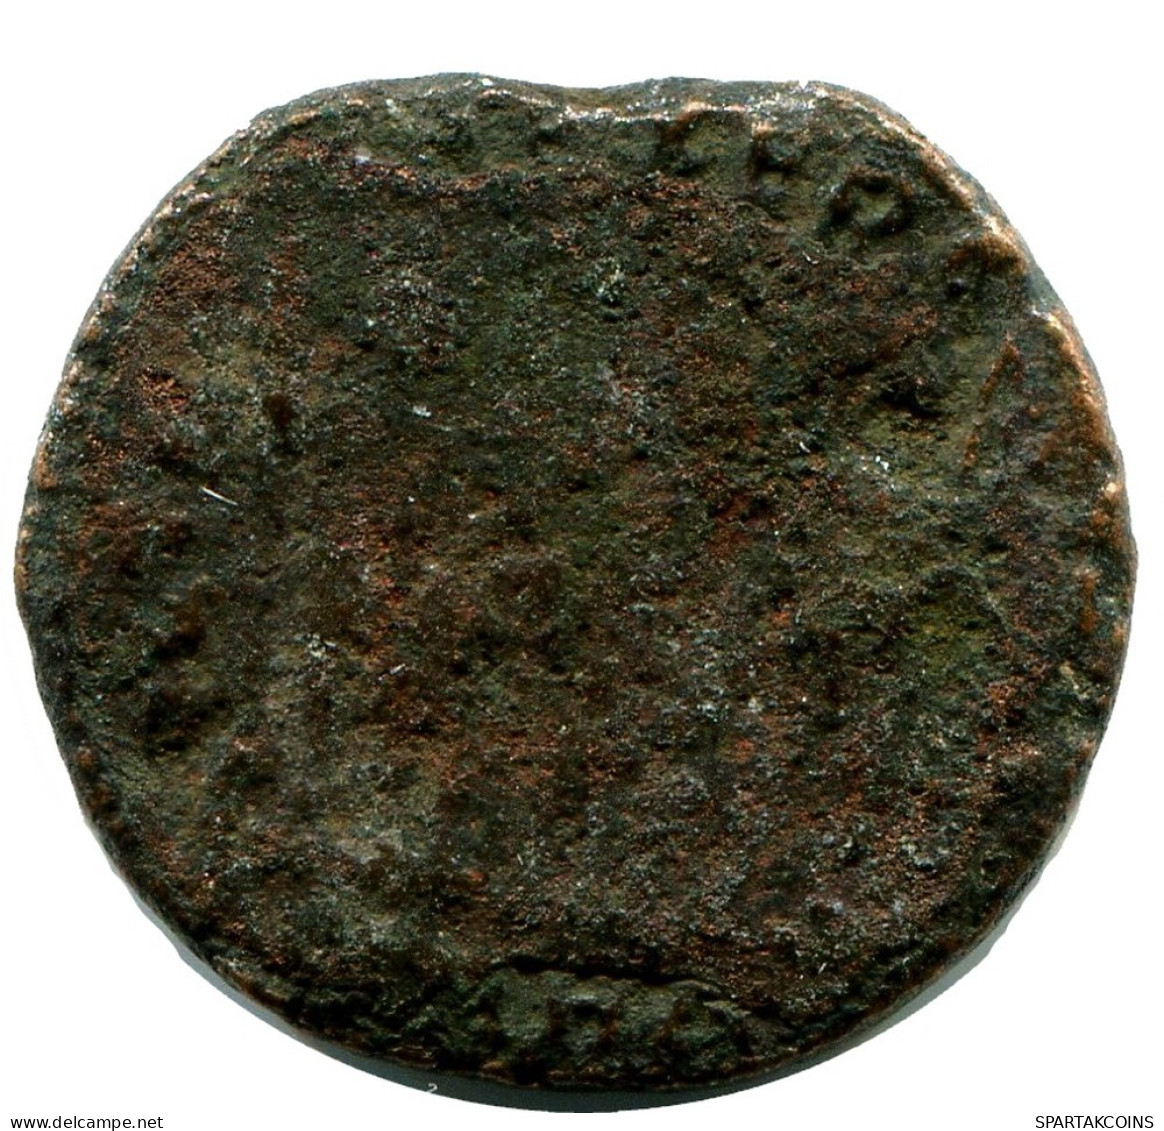 ROMAN Coin MINTED IN ANTIOCH FROM THE ROYAL ONTARIO MUSEUM #ANC11066.14.D.A - El Imperio Christiano (307 / 363)